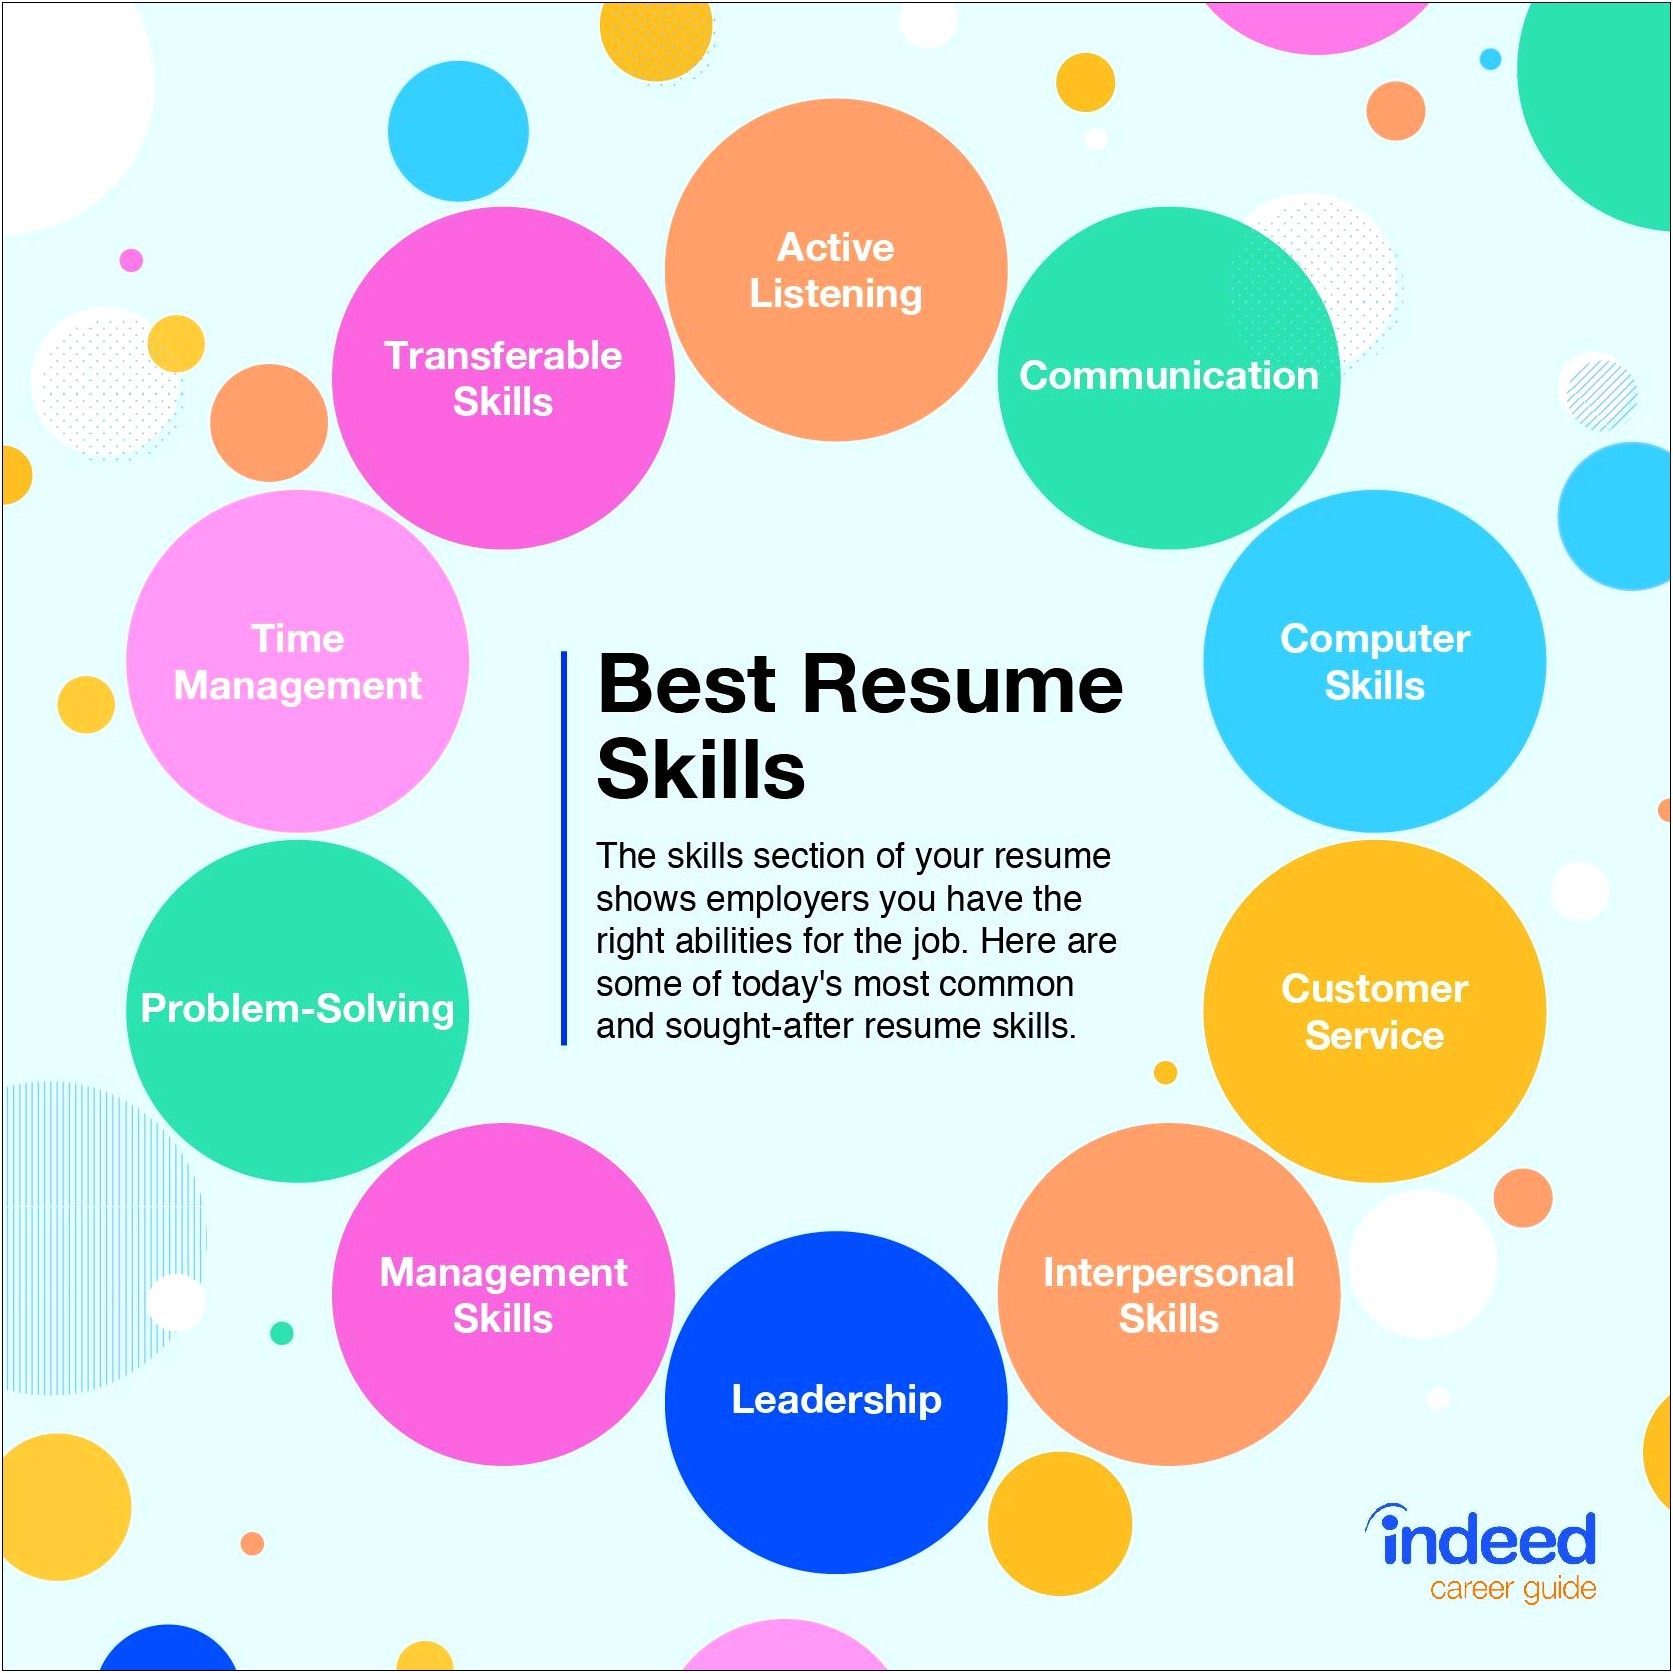 Resume Qualities And Skills Best To List